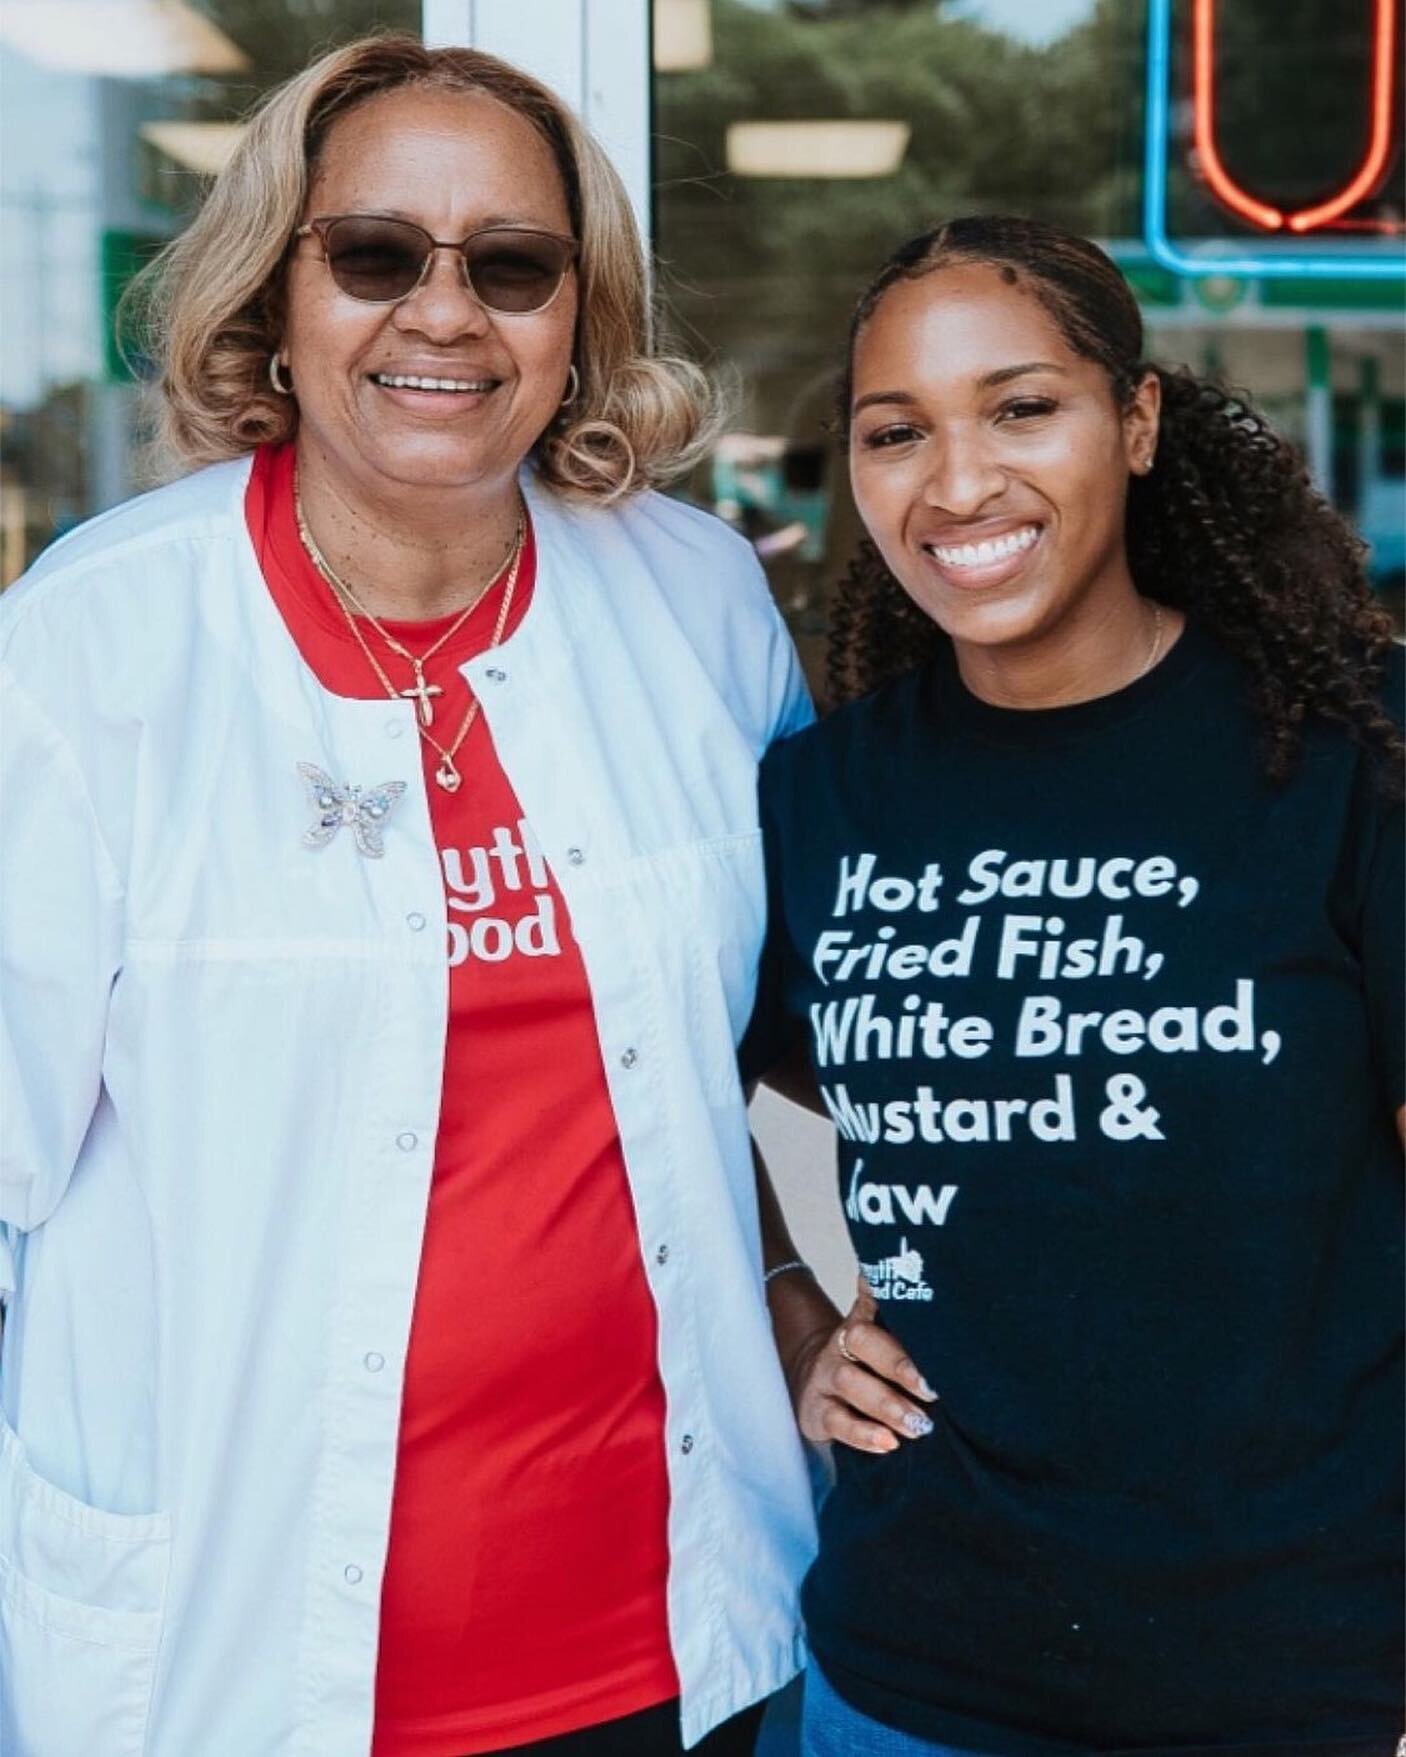 ✨WHAT AN AWESOME WRITE UP ON OUR FAMILY! THANKS SO MUCH! ✨

Repost from @bestofwinston
&bull;
When asked how they've come to sit side by side as co-owners of Forsyth Seafood, Ashley Armstrong and her mother Virginia Hardesty began by describing a pho